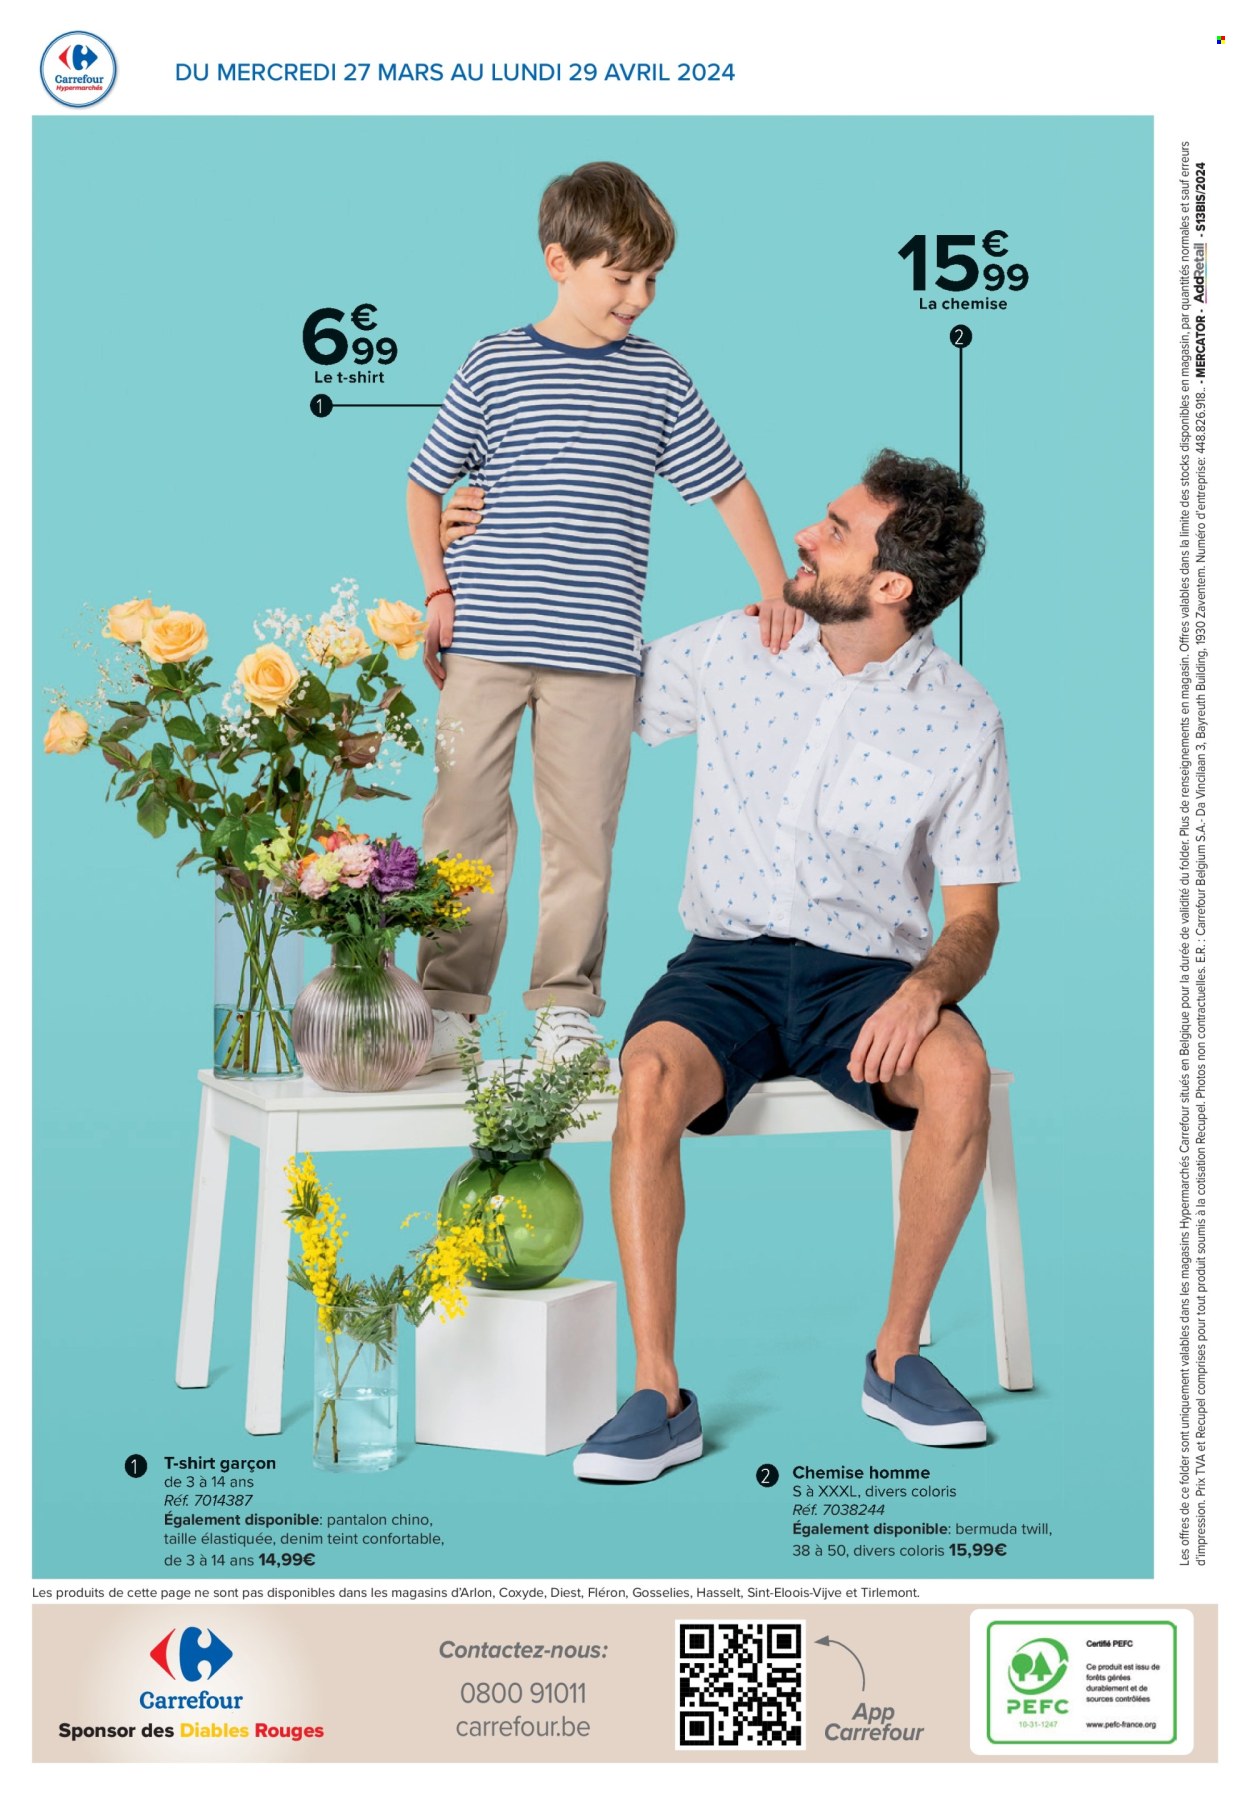 Catalogue Carrefour hypermarkt - 27.3.2024 - 29.4.2024. Page 16.